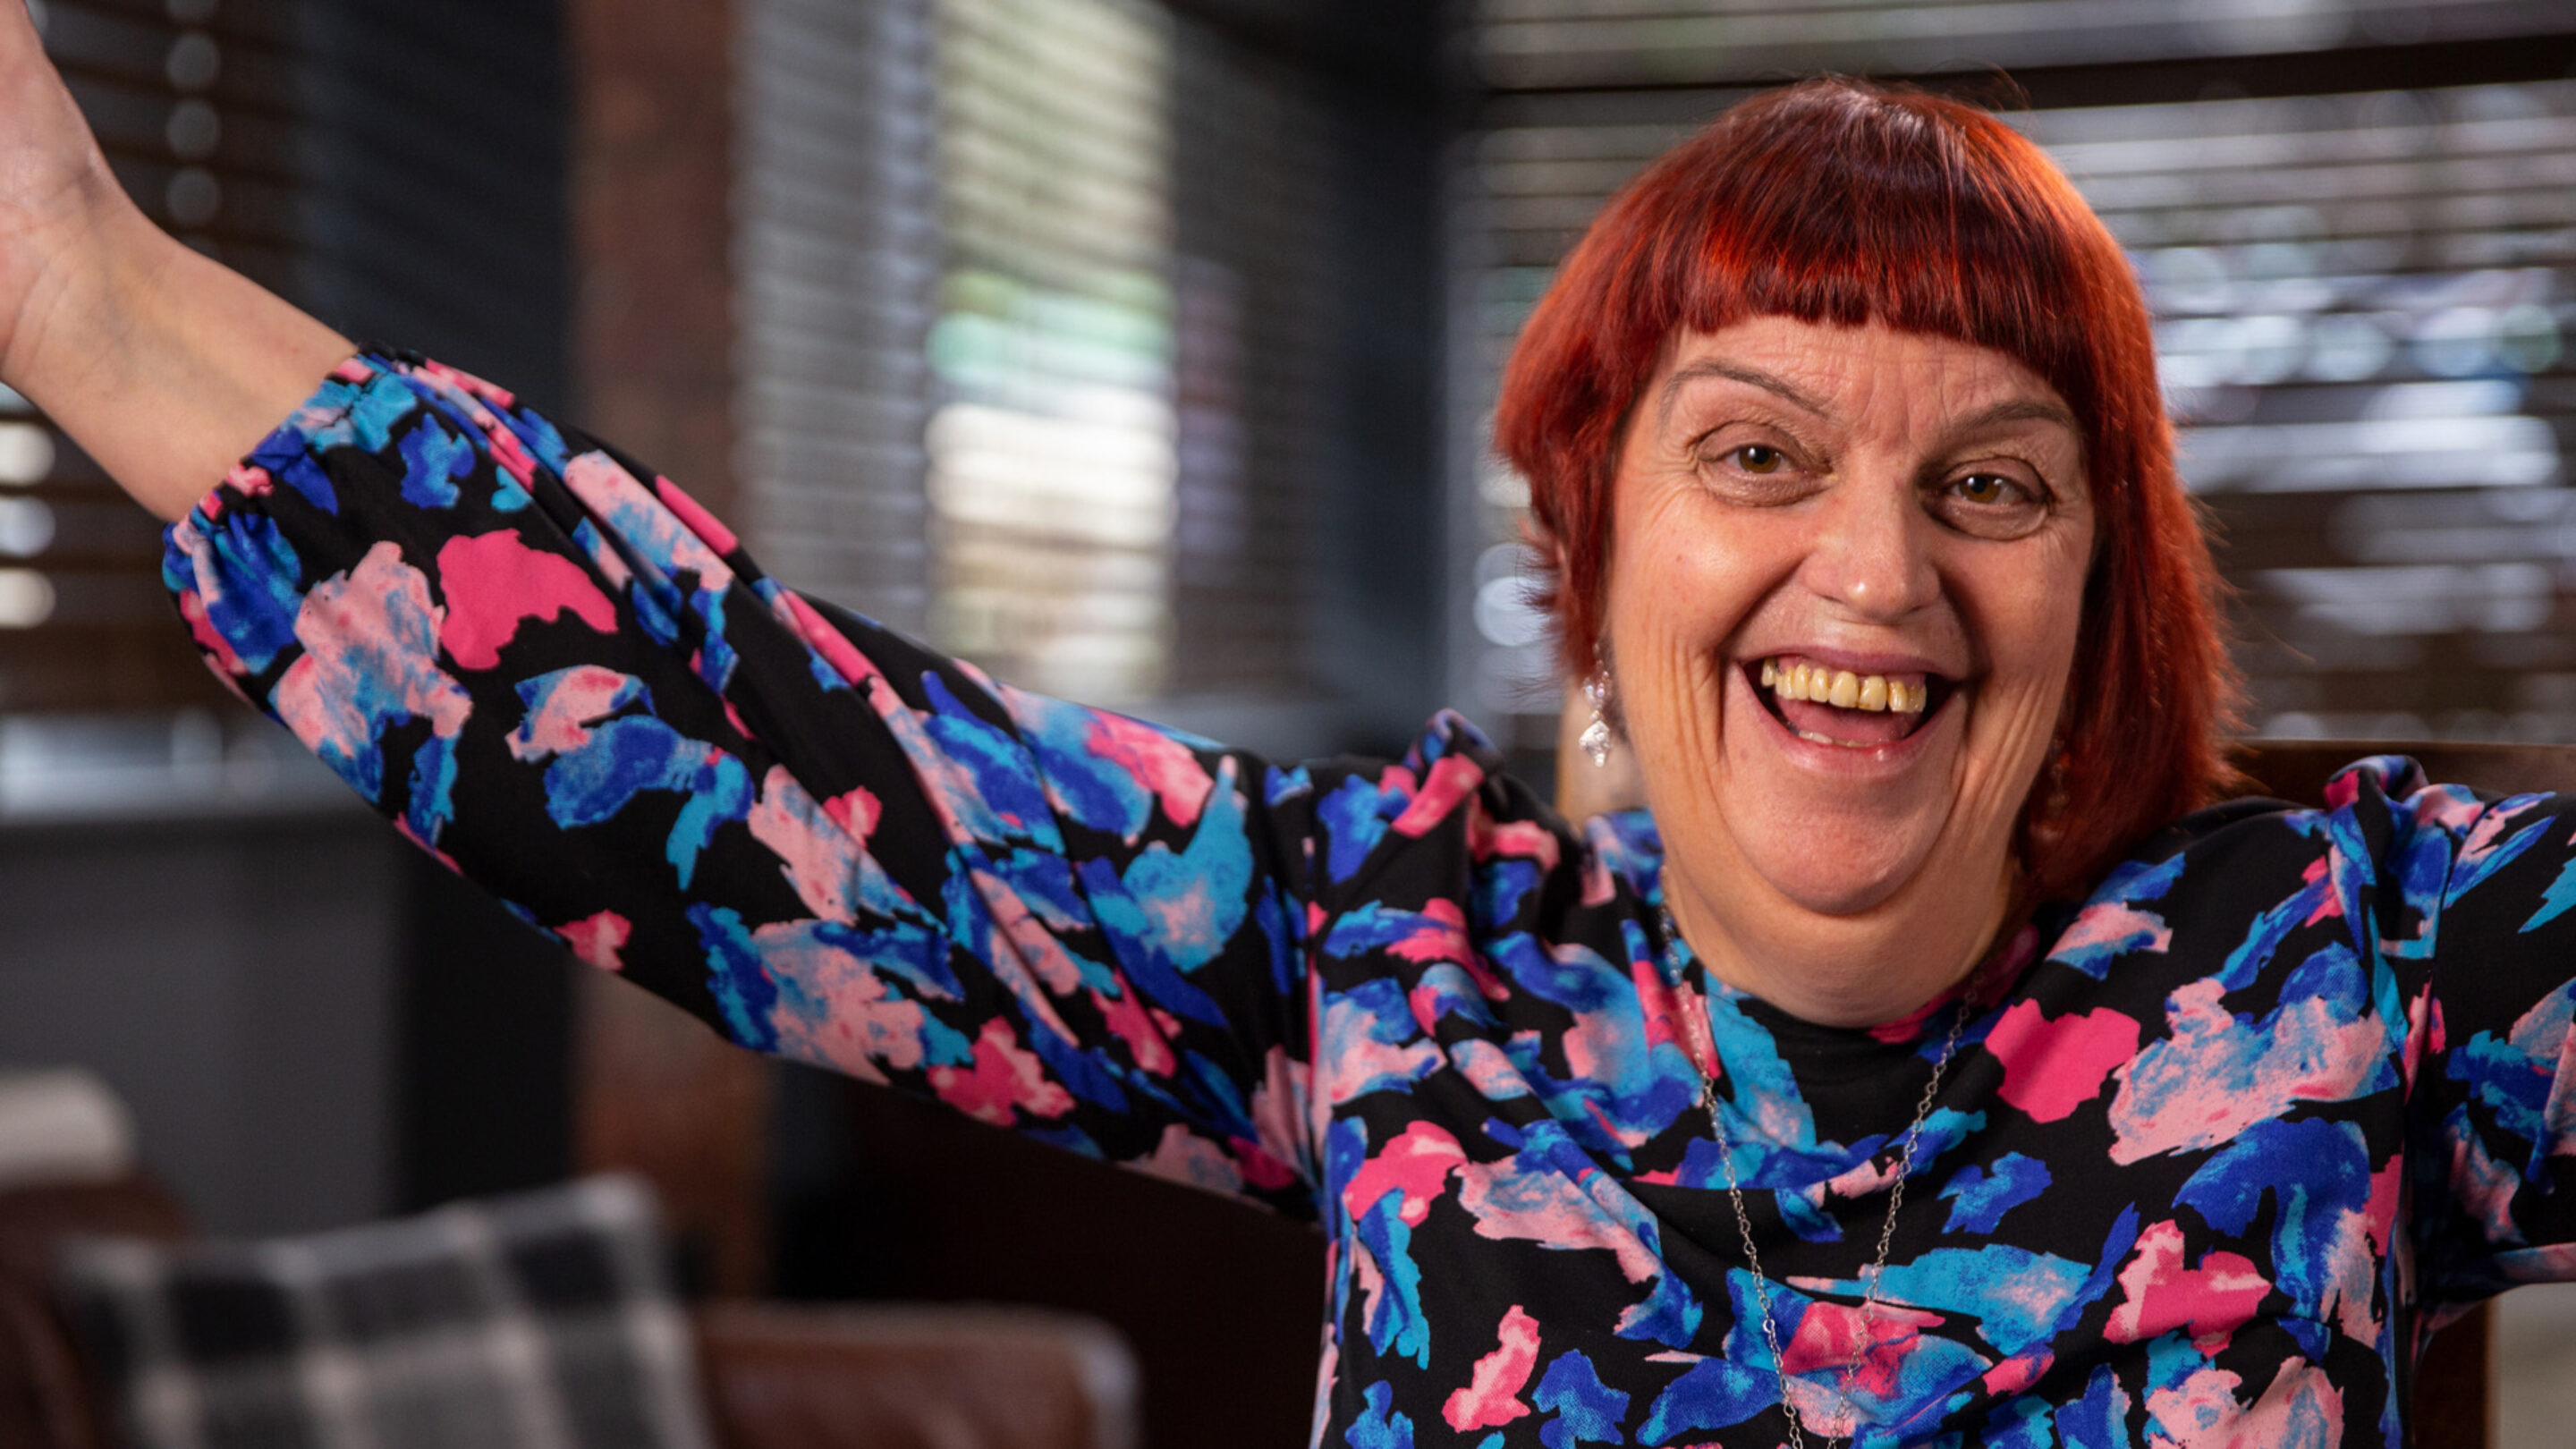 A former CAP client, now debt free. She has bright red hair and colourful top, and is smiling enthusiastically with her hands in the air.